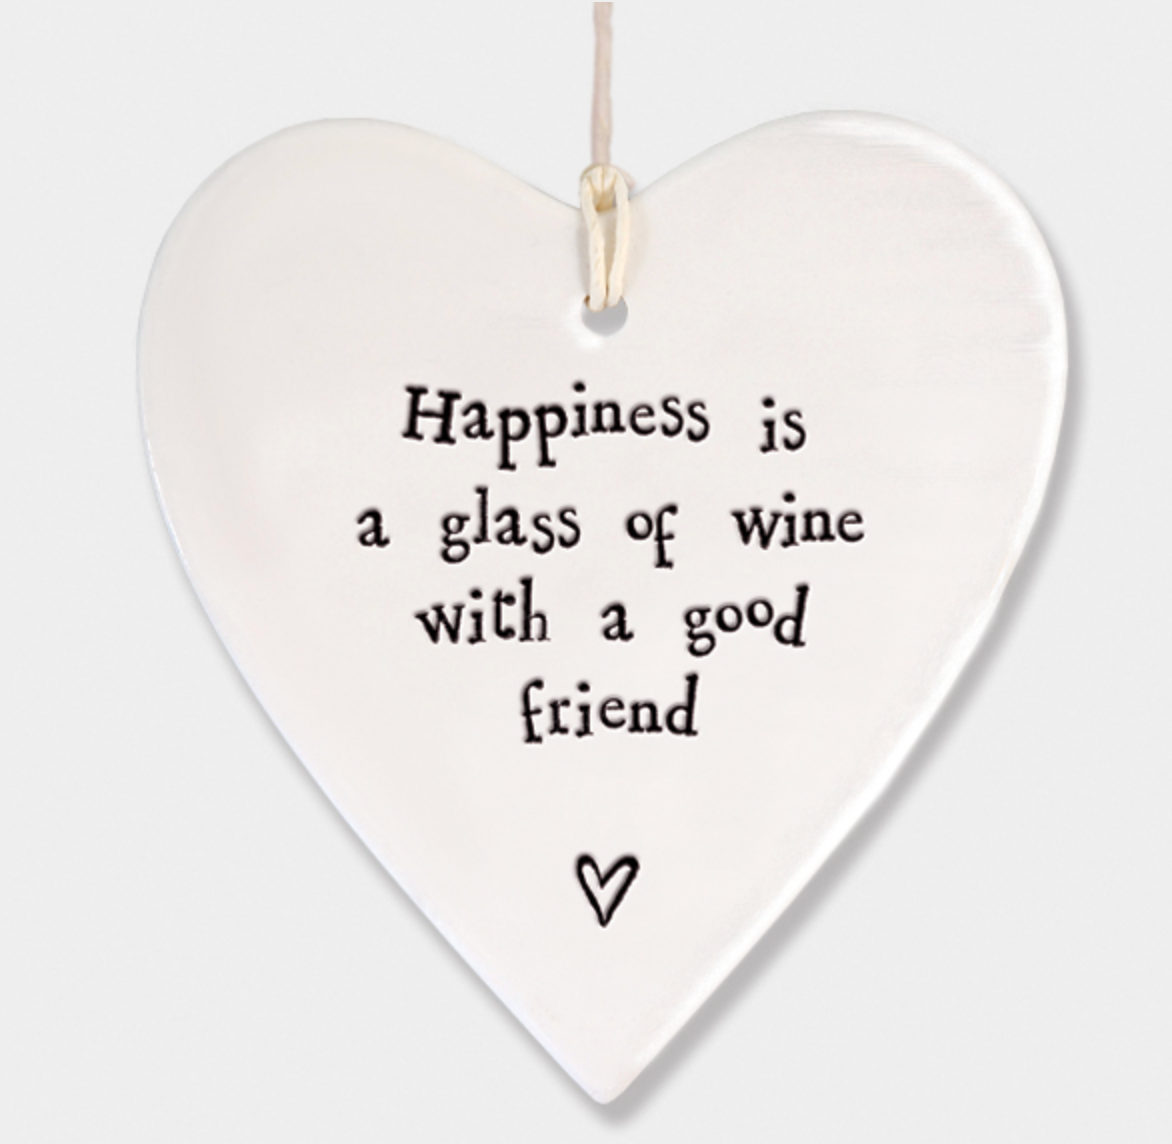 East of India Porcelain Hanging Heart - Happiness is a glass of wine....